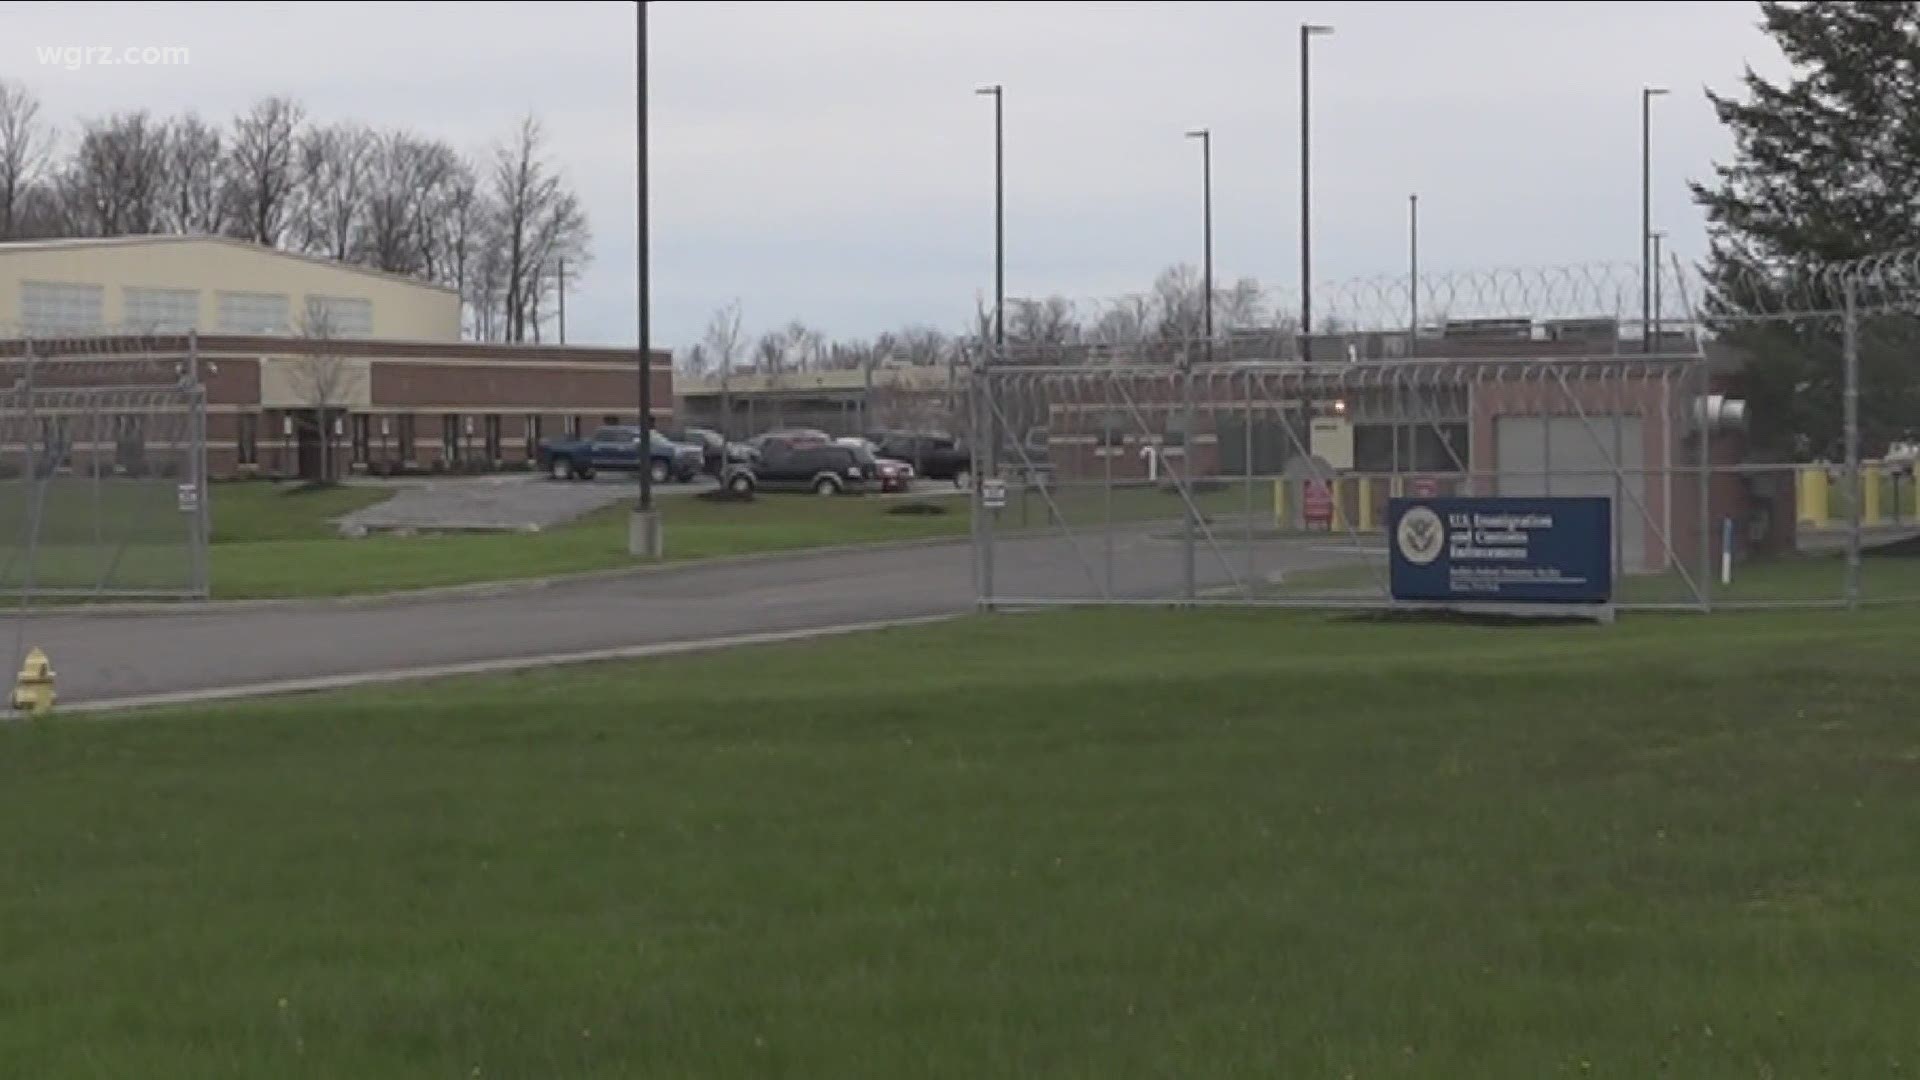 A  judge ruled that ICE needs to develop a vaccination plan for people detained at the Buffalo Federal Detention Facility in Batavia.